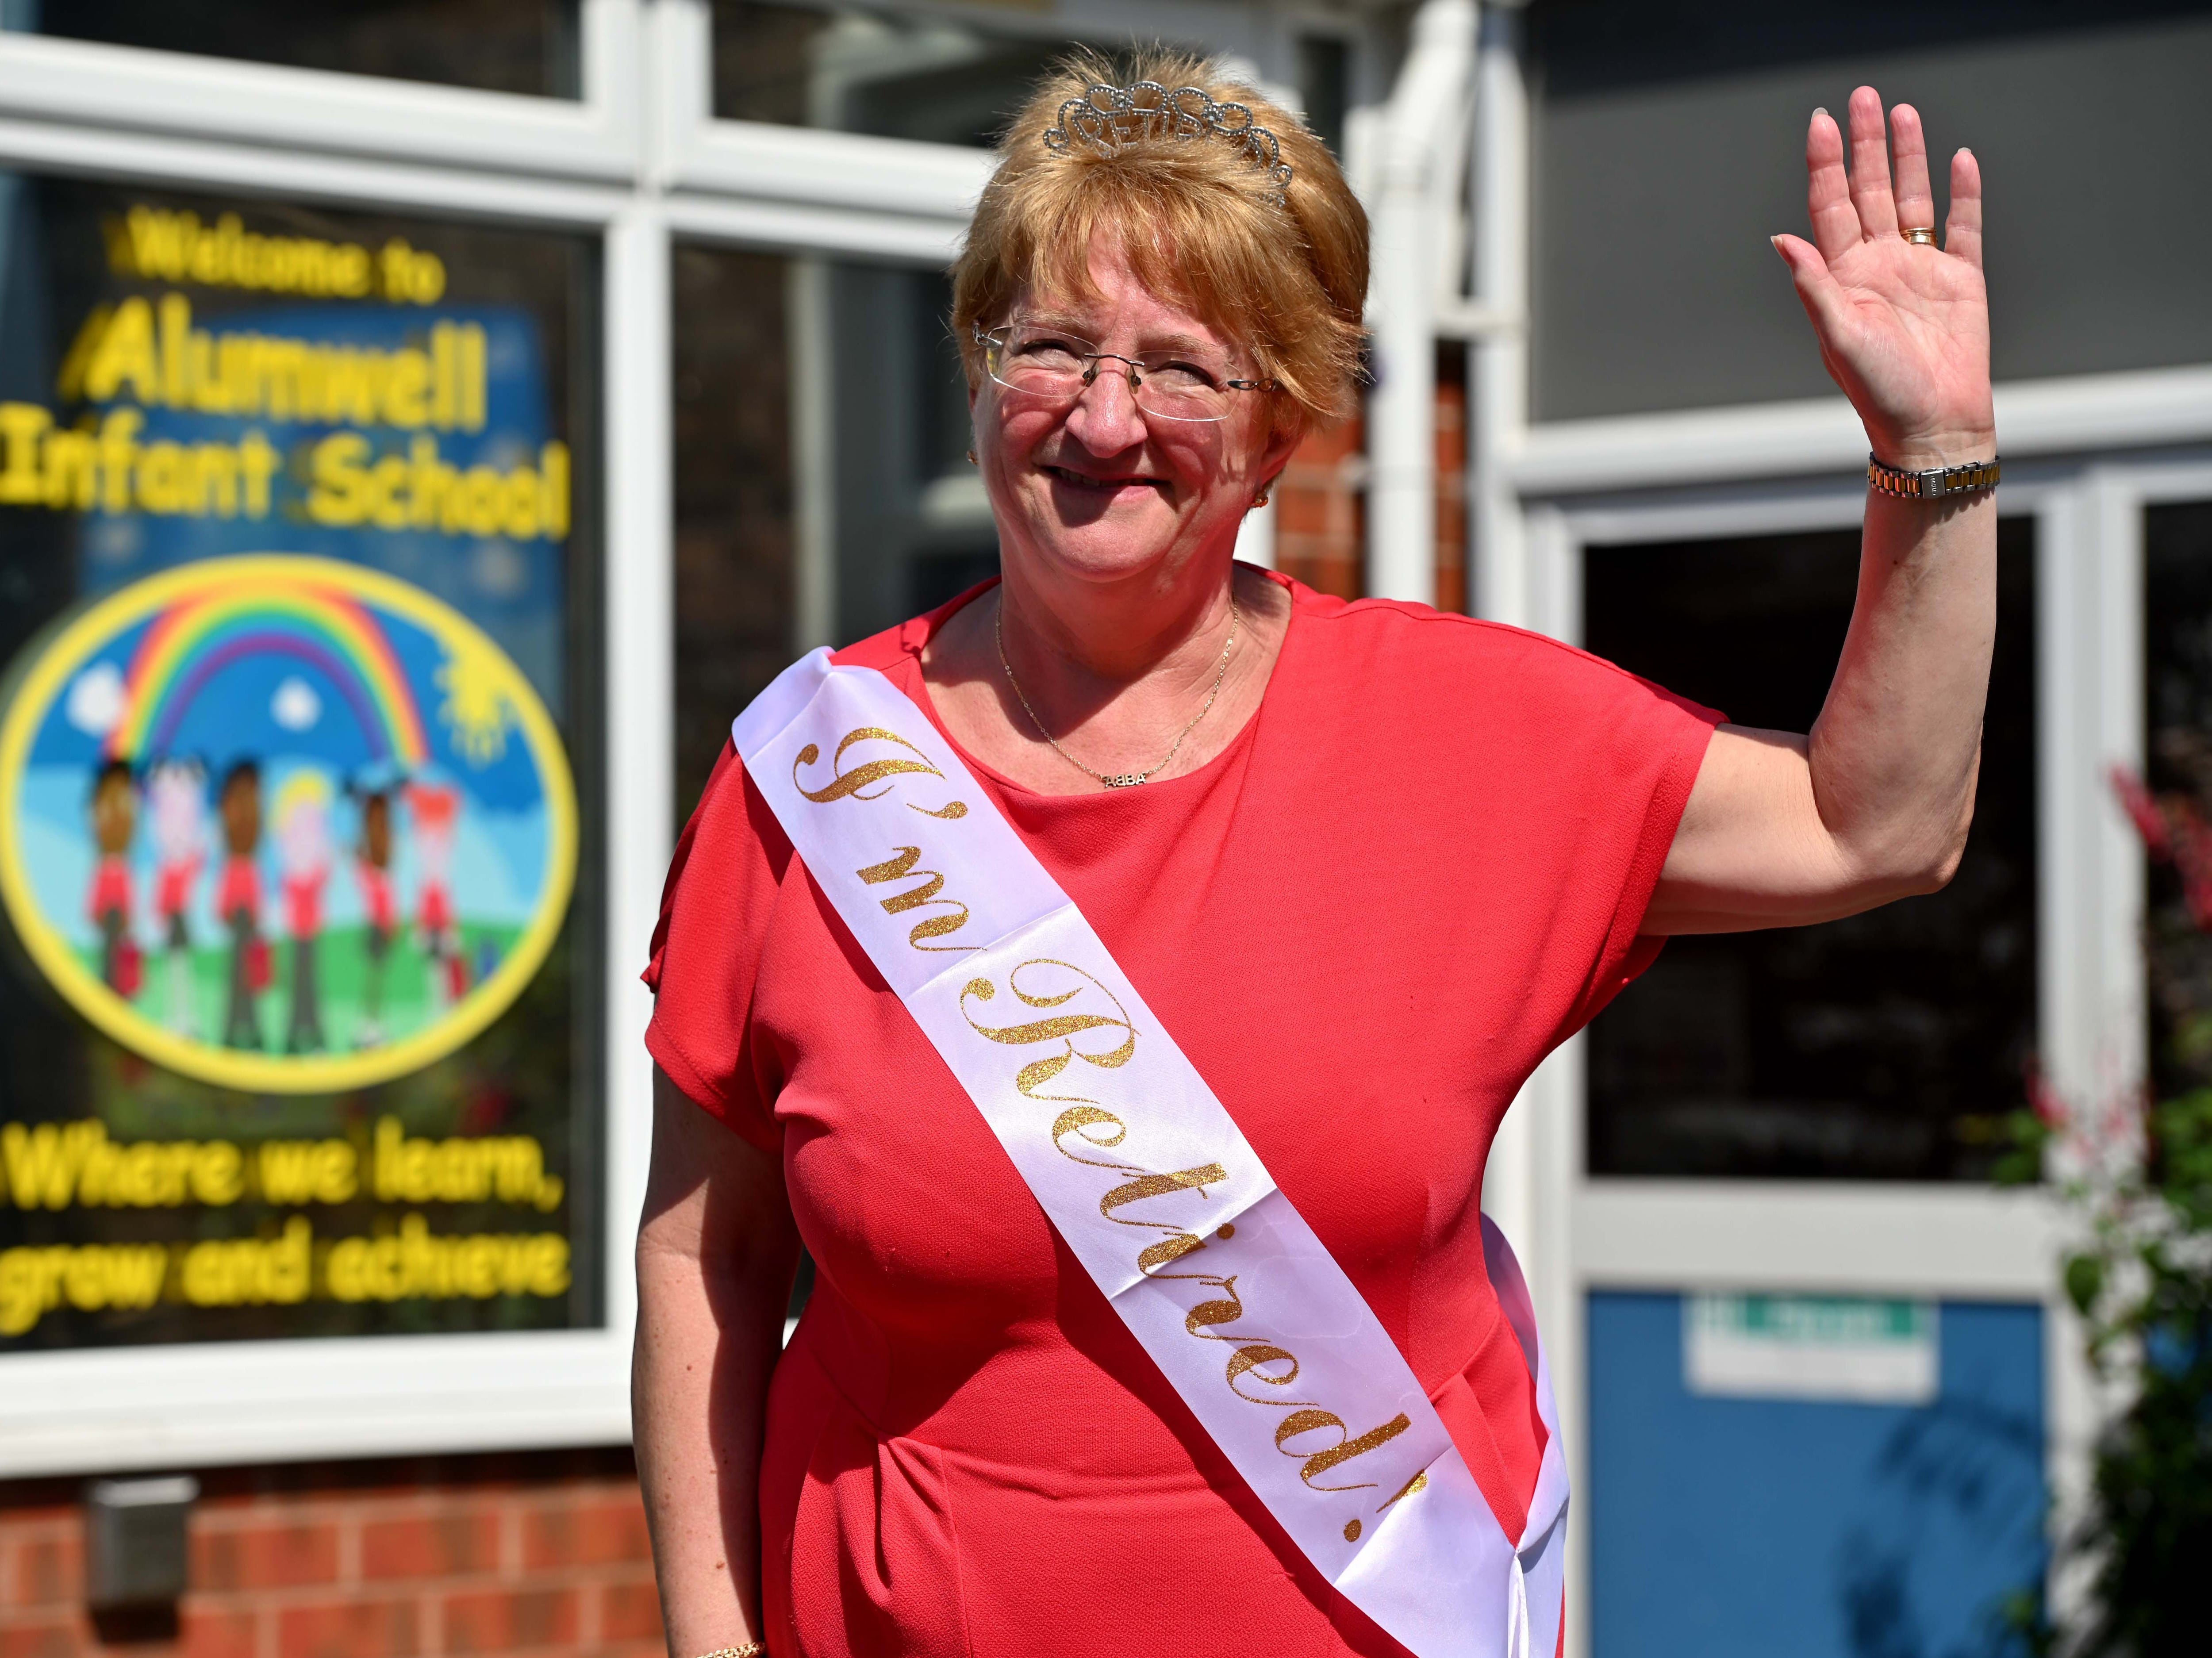 'We've had so many fun times': Walsall headteacher retires after 40+ years of service to children